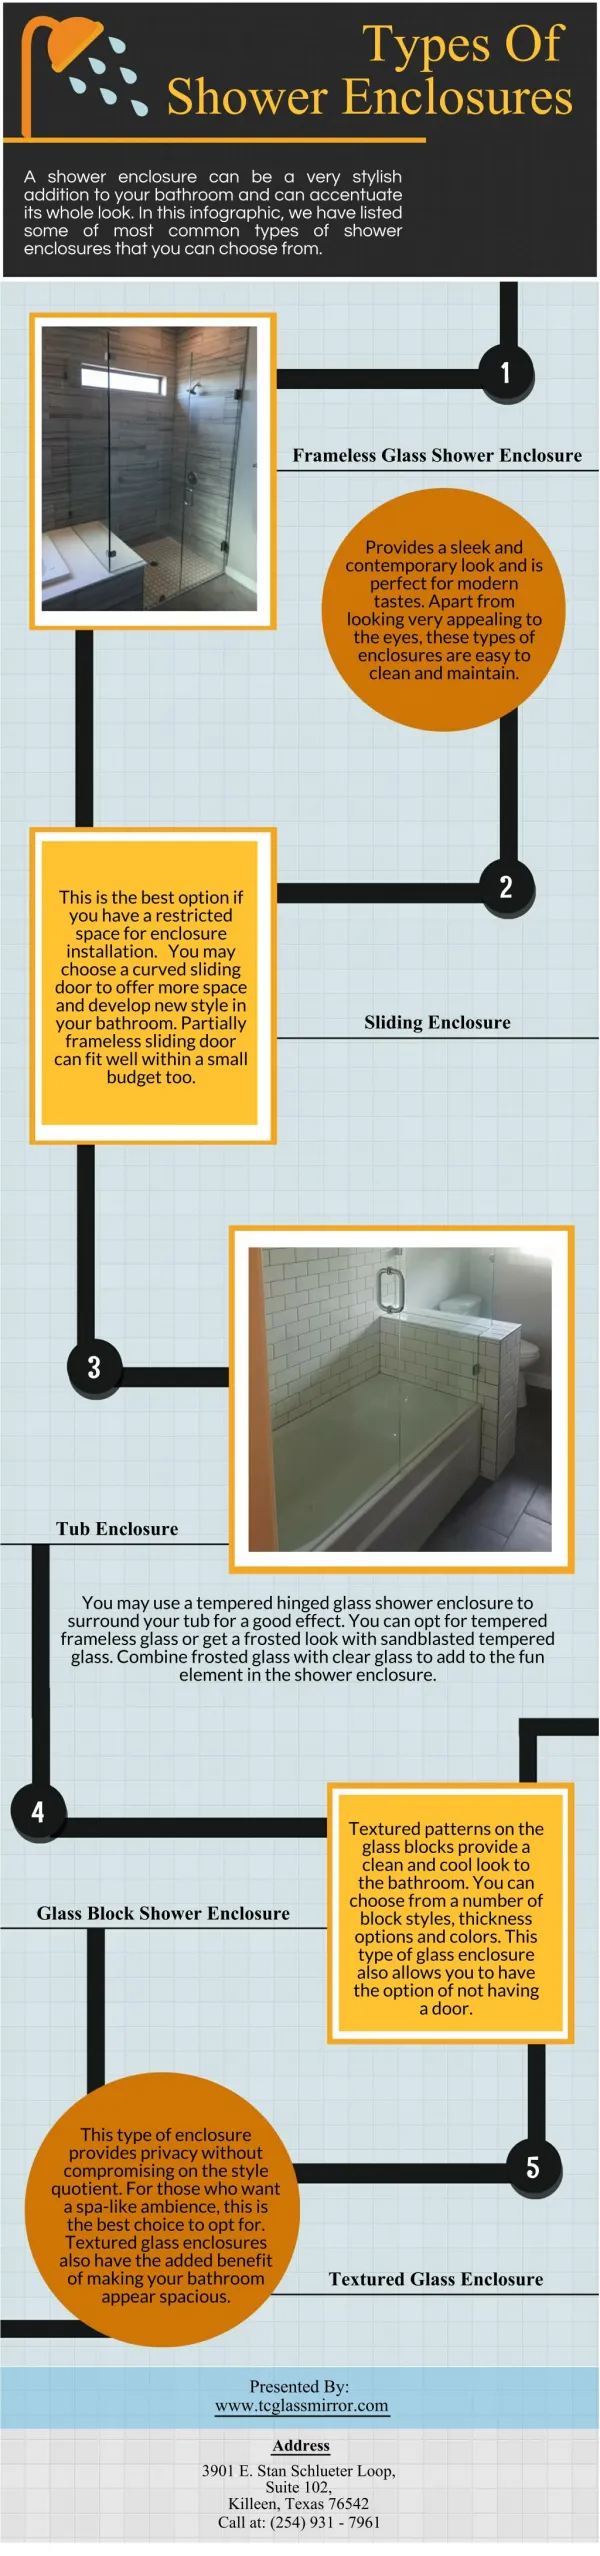 Types Of Shower Enclosures